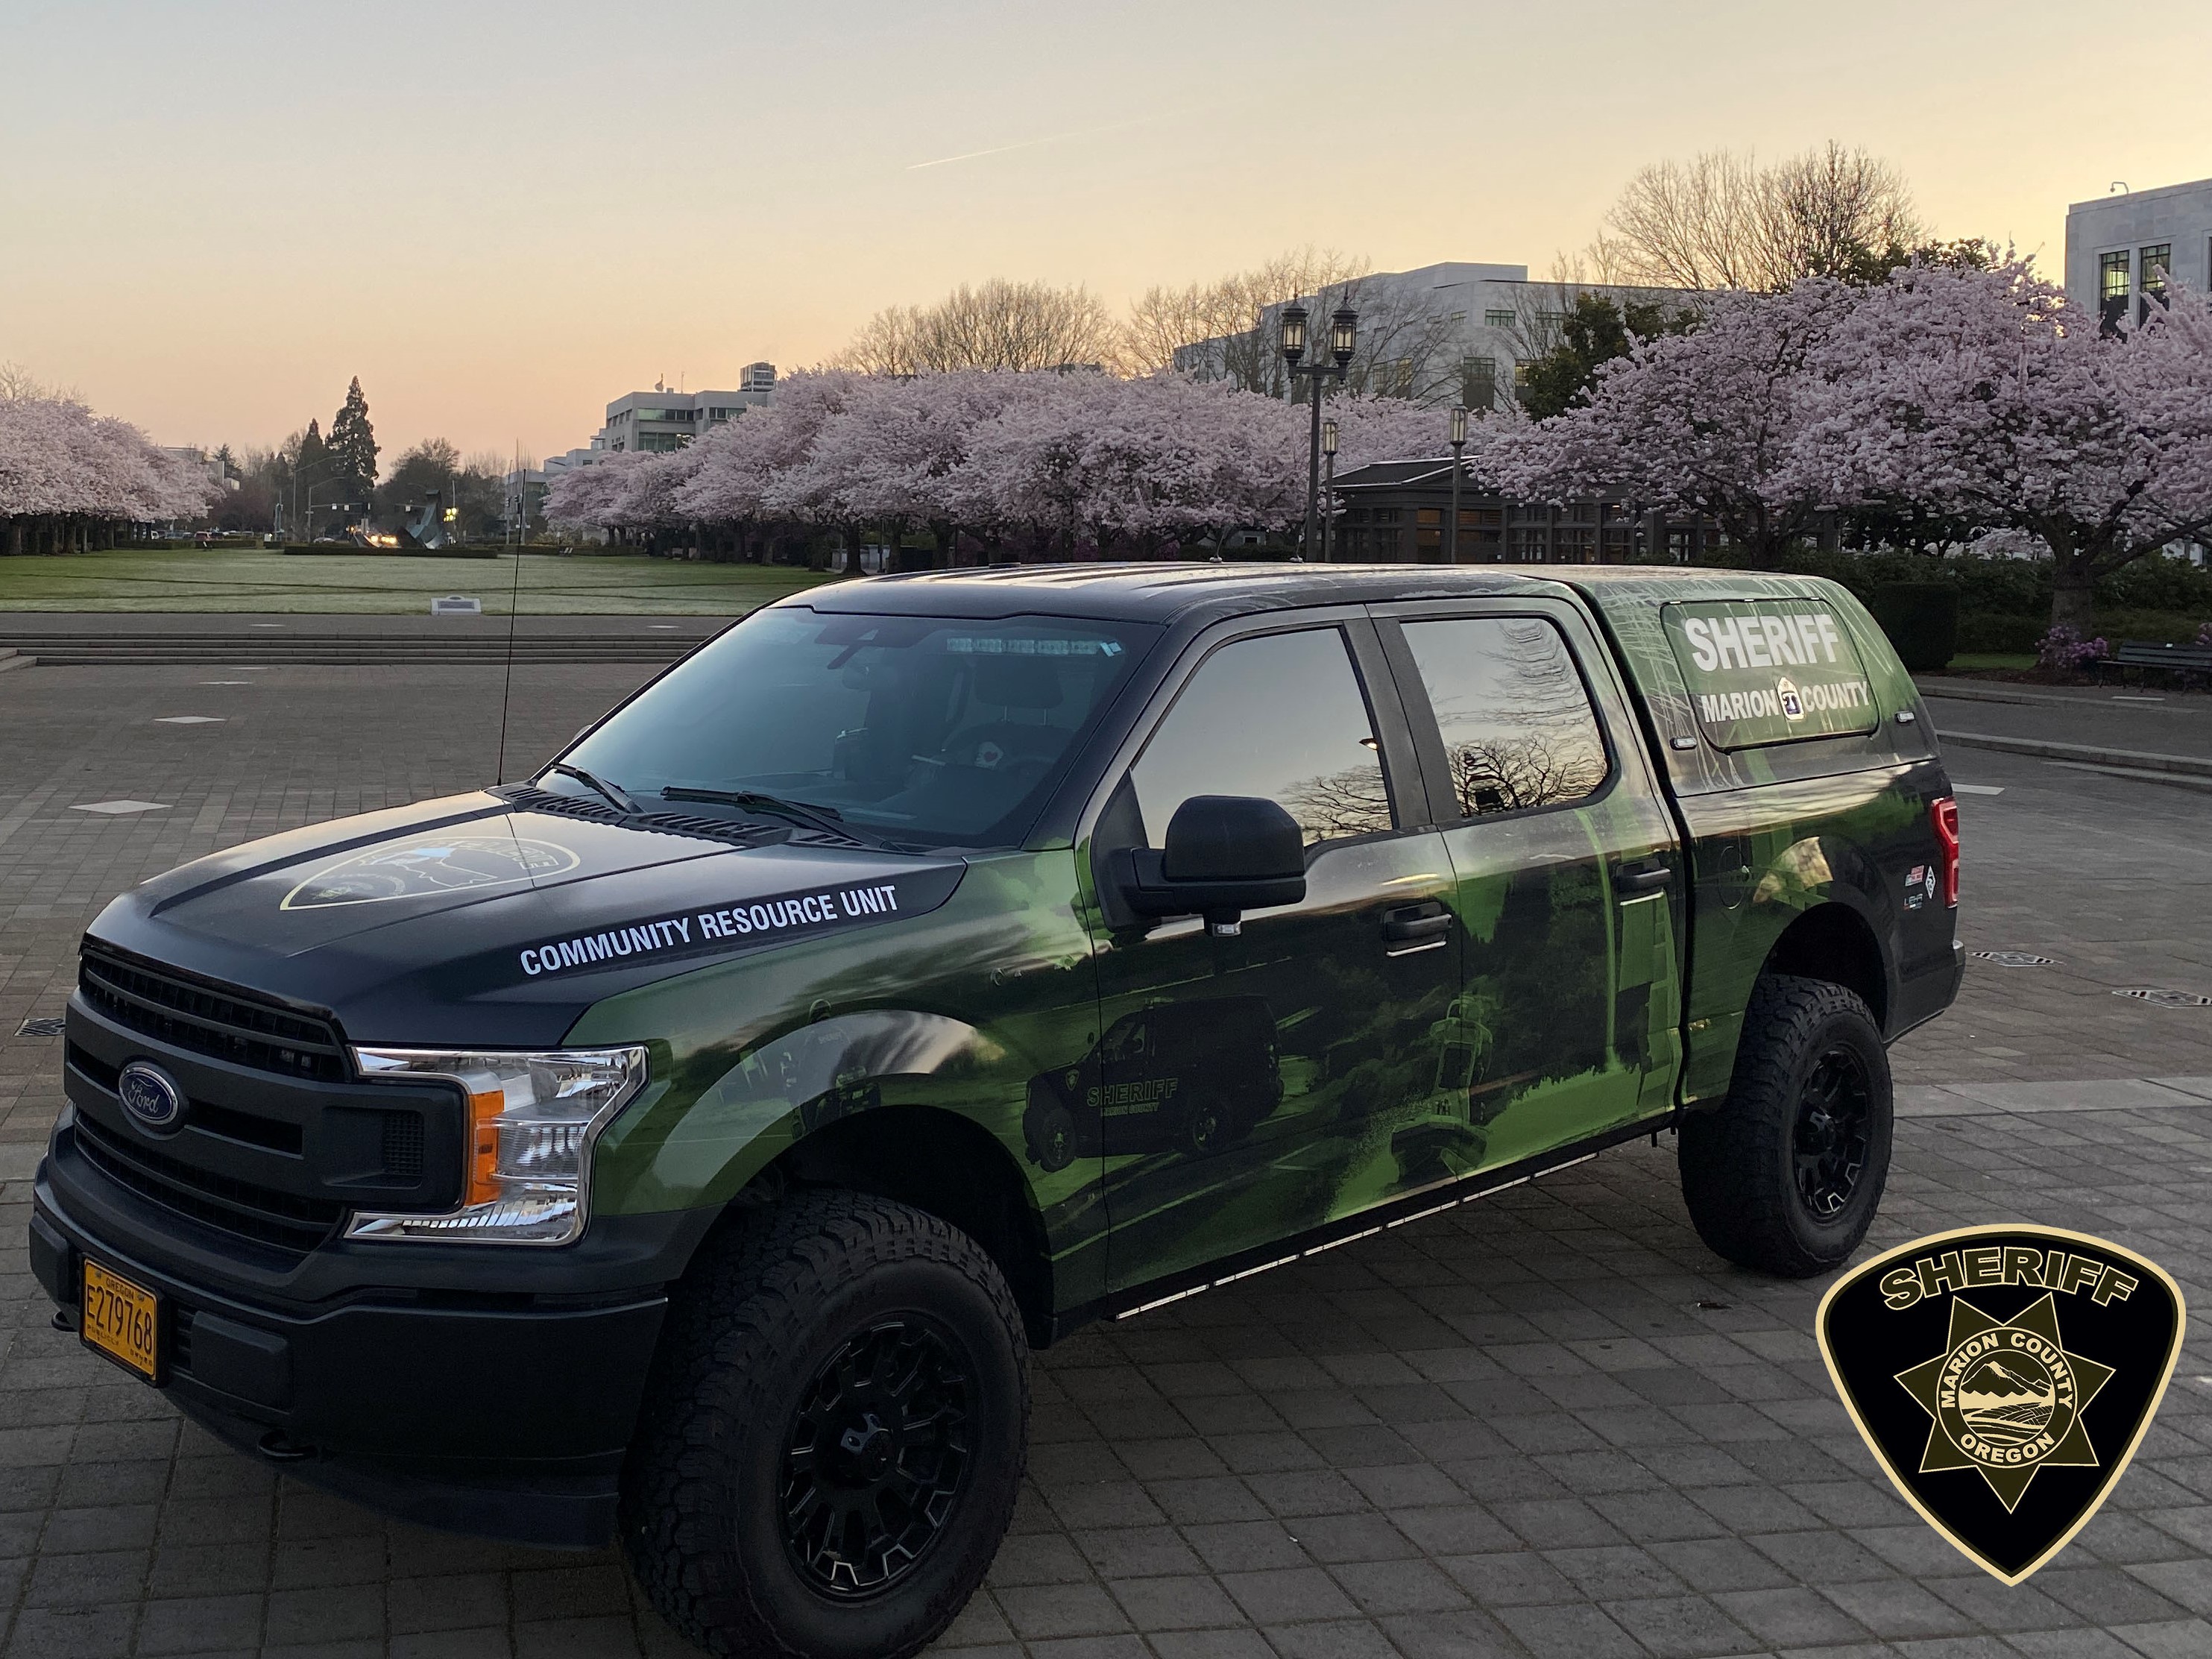 Sheriff Truck with cherry blossom trees